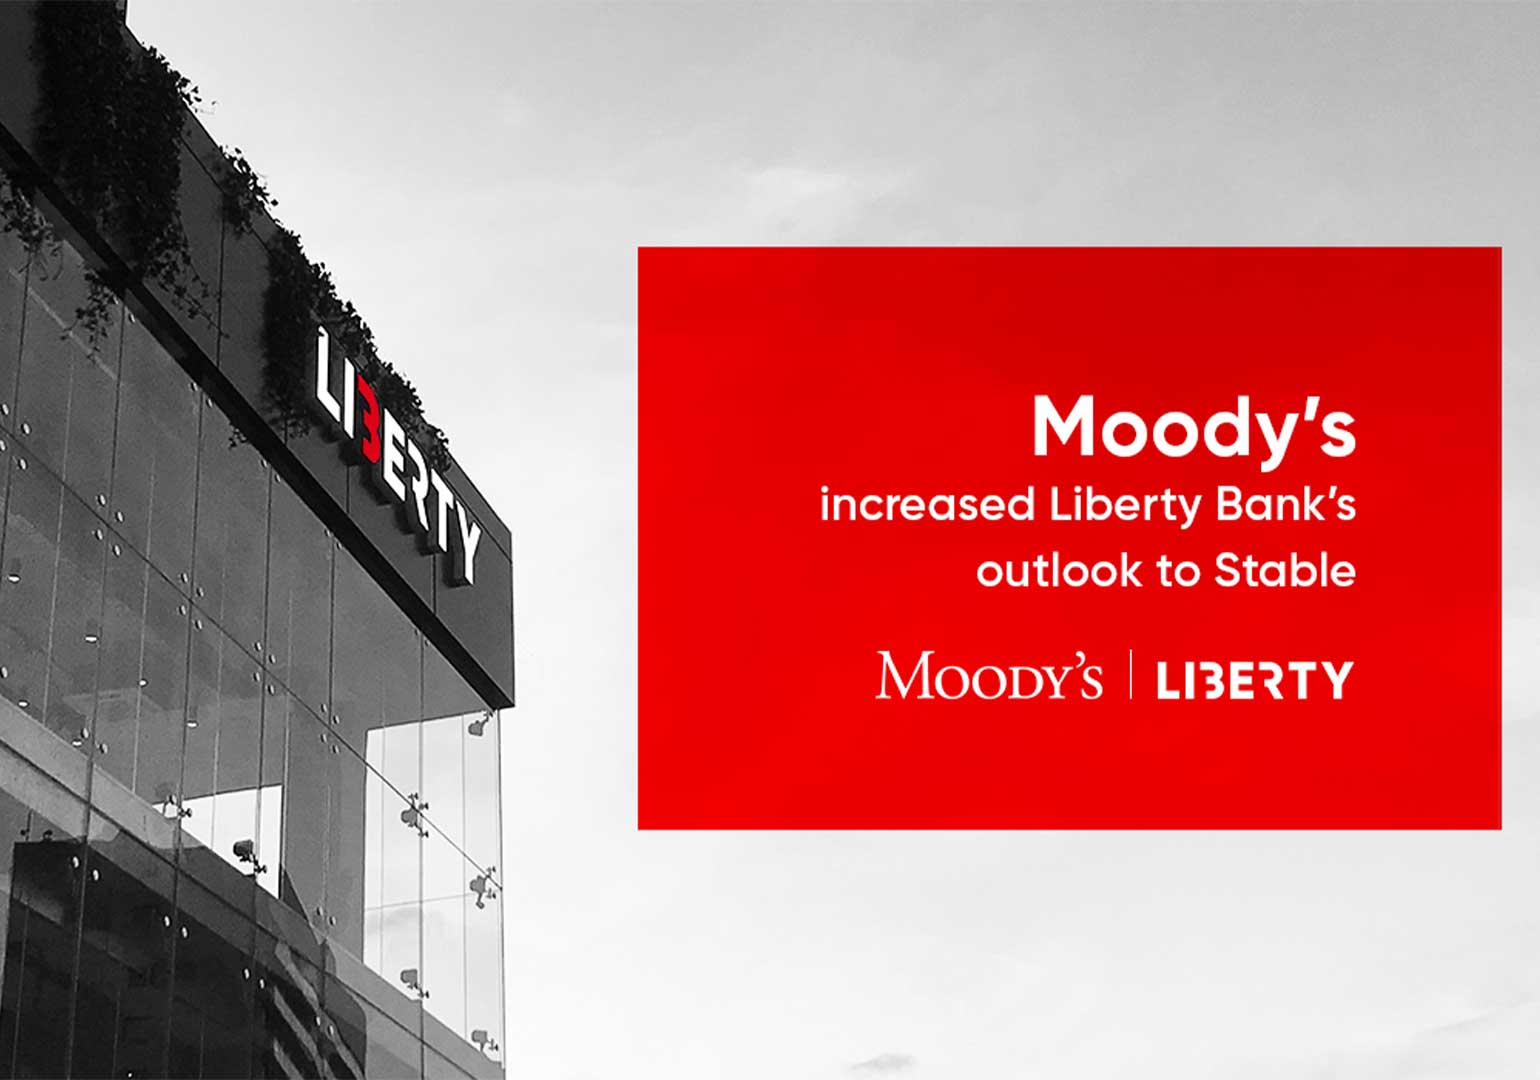 International Credit Rating Agency Moody’s Has Increased Liberty Bank’s Long Term Outlook to “Stable” After Satisfactory Analysis